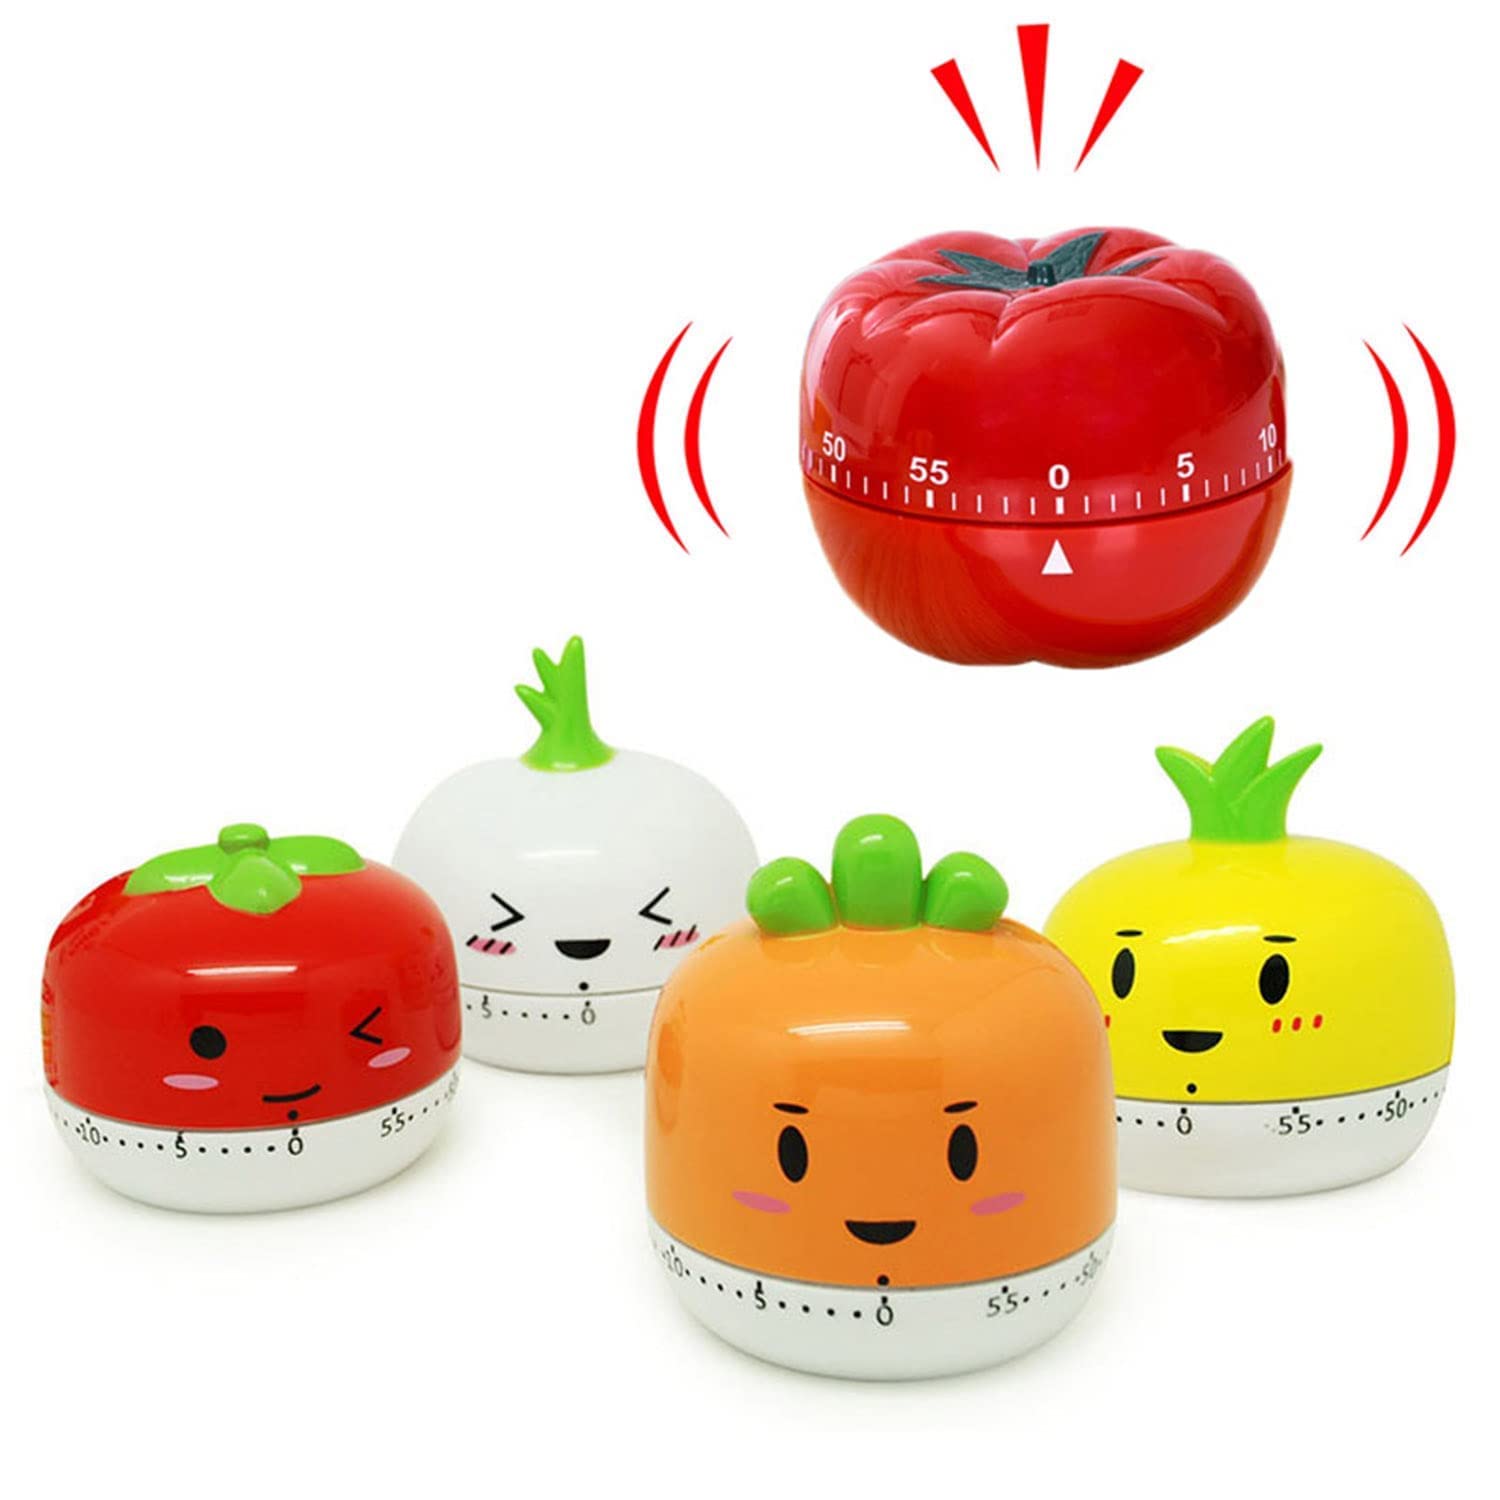 Mechanical Timer 60 Minutes Cute Kitchen Timer Cooking Timer Clock Loud Alarm Counters Manual Timer